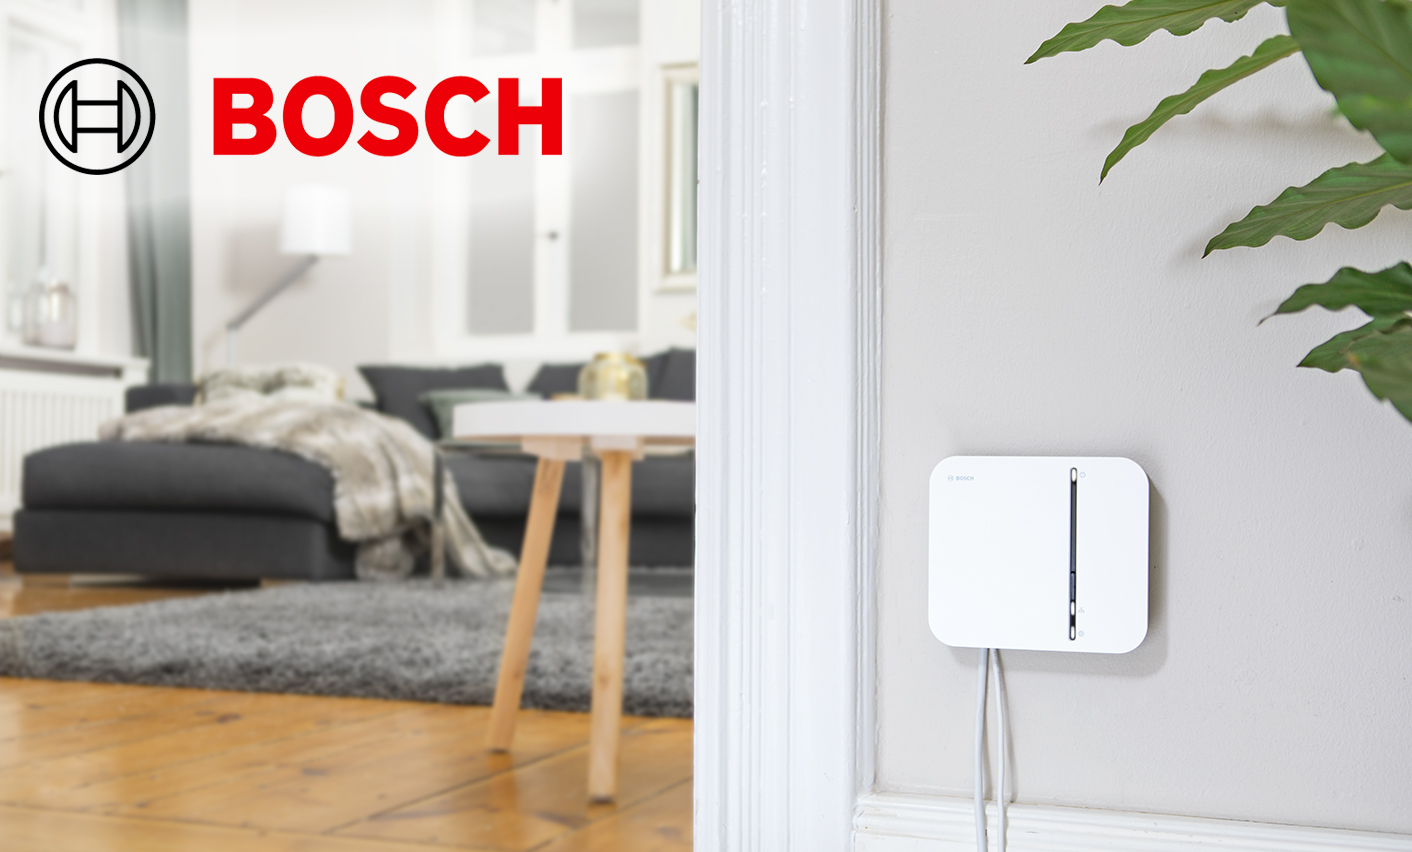 Proved security for a smart home: Re-certification of the Bosch Smart Home  System - TÜV TRUST IT GmbH Unternehmensgruppe TÜV AUSTRIA